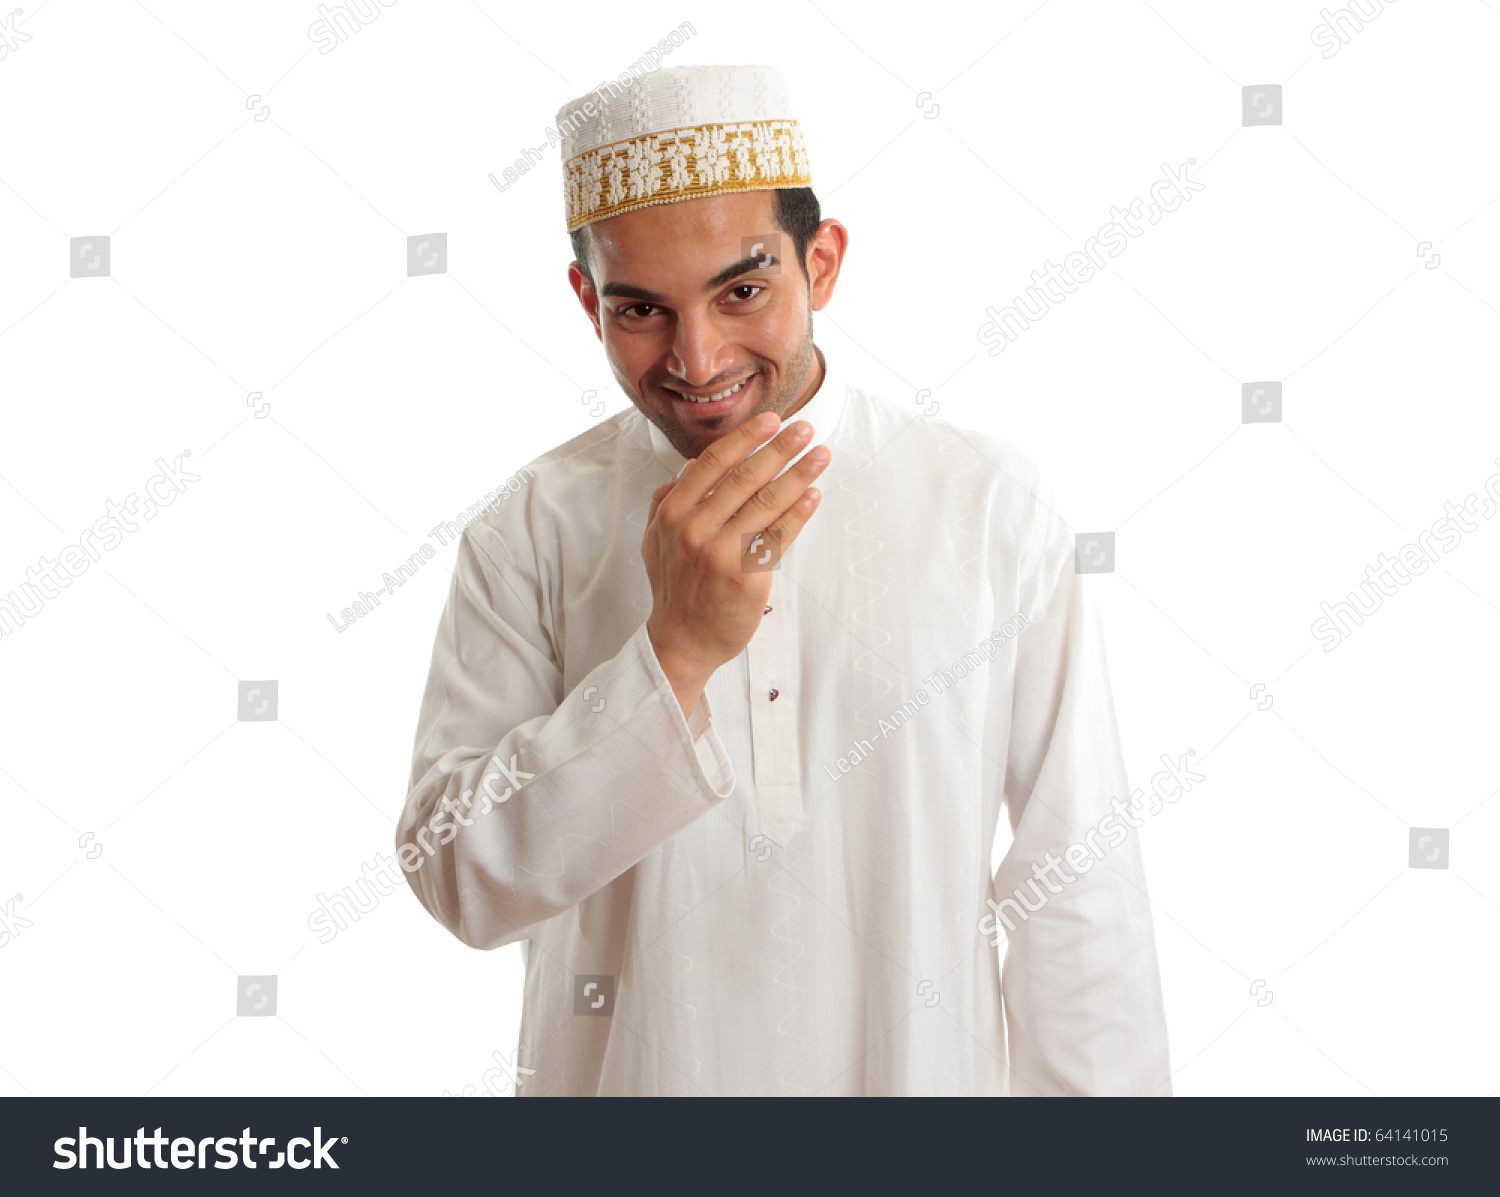 Smiling friendly ethnic man wearing a traditional embroidered robe with ruby buttons and a white and gold embroidered topi hat.  White background. #64141015